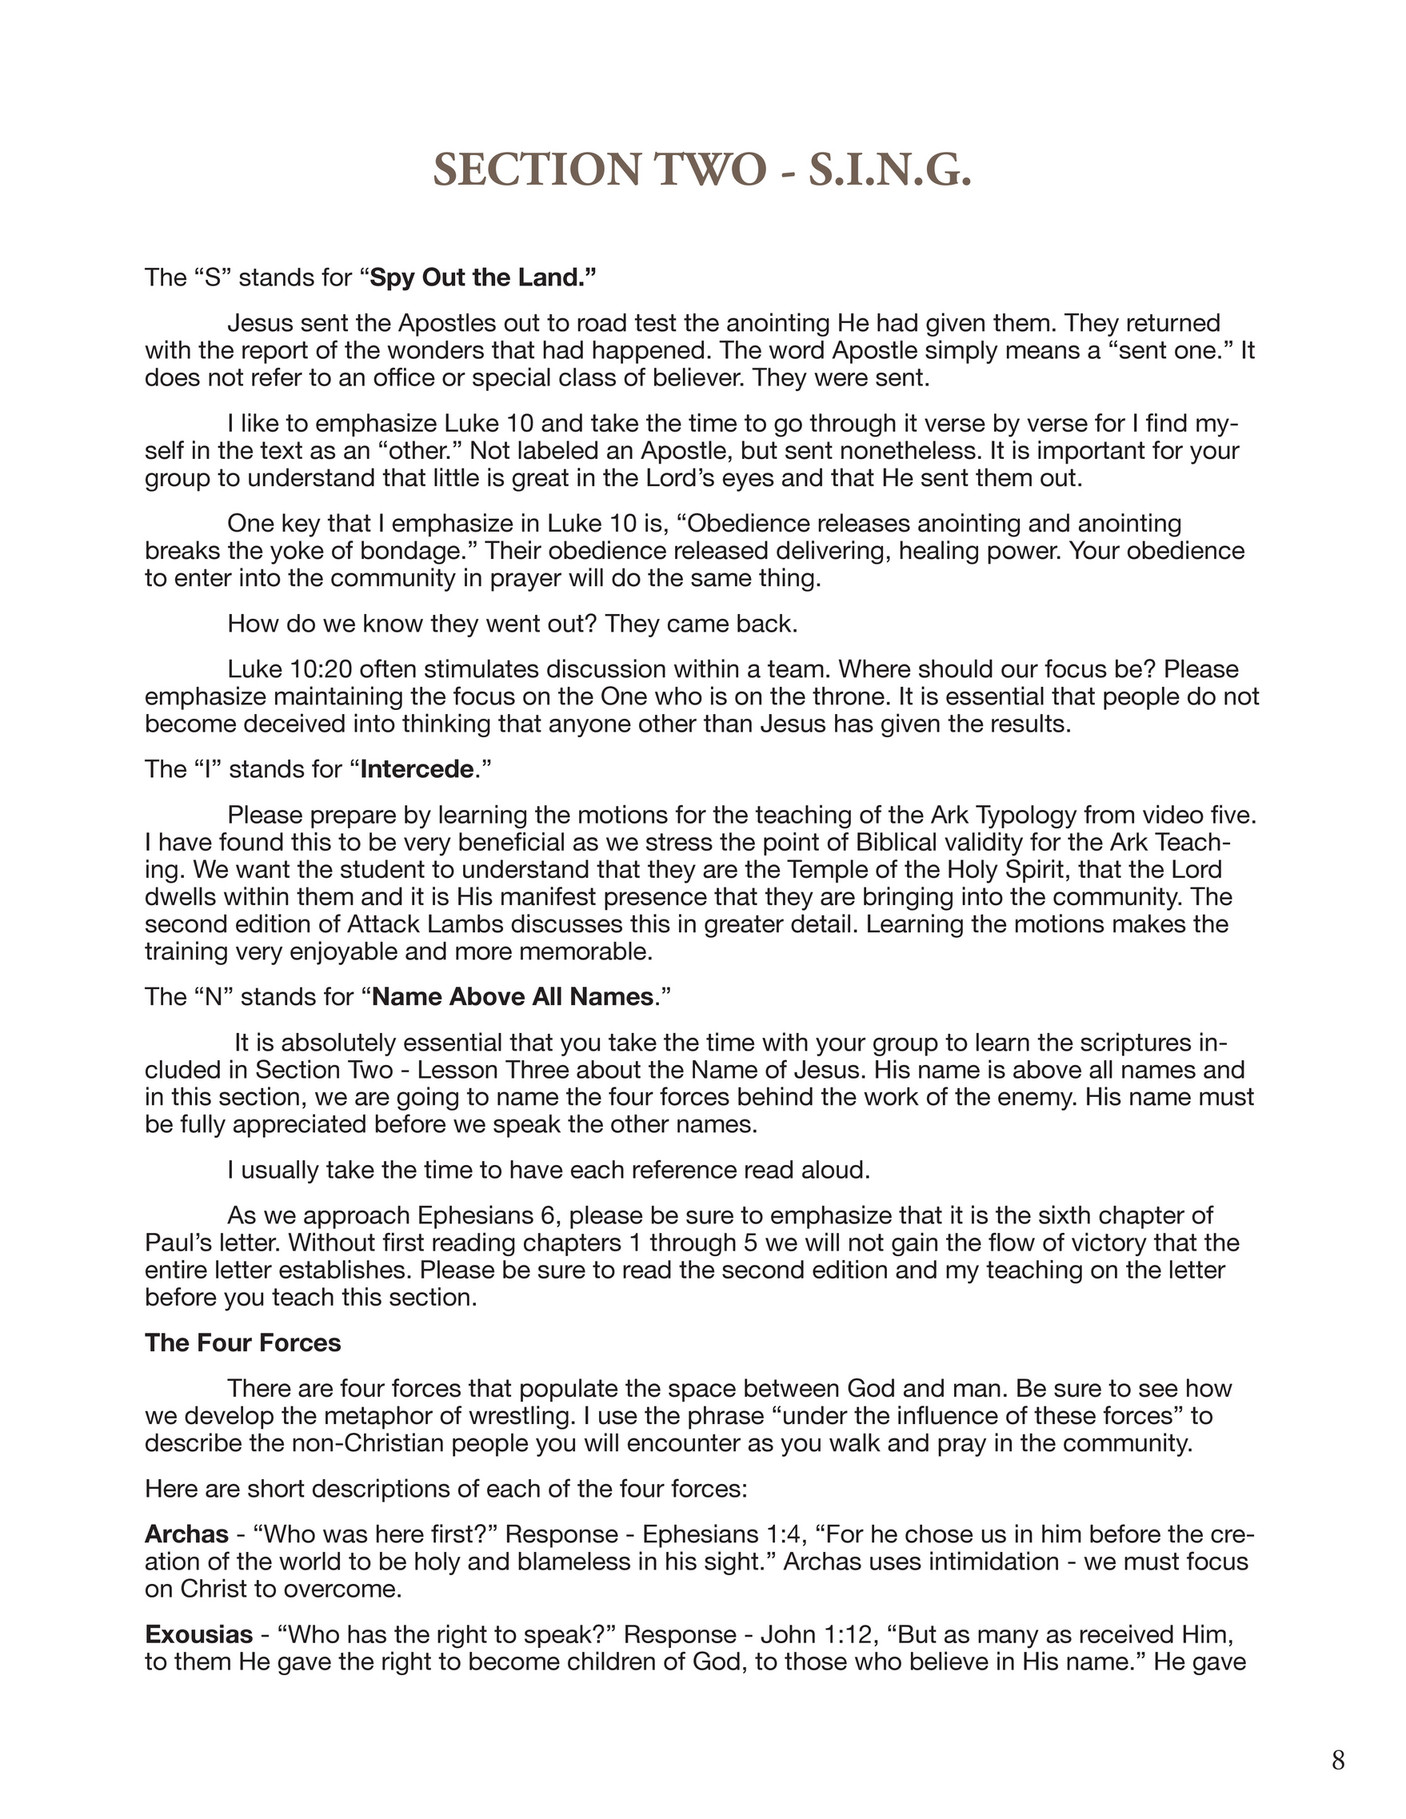 south-east-asia-prayer-center-leader-s-guide-s2-introduction-page-1